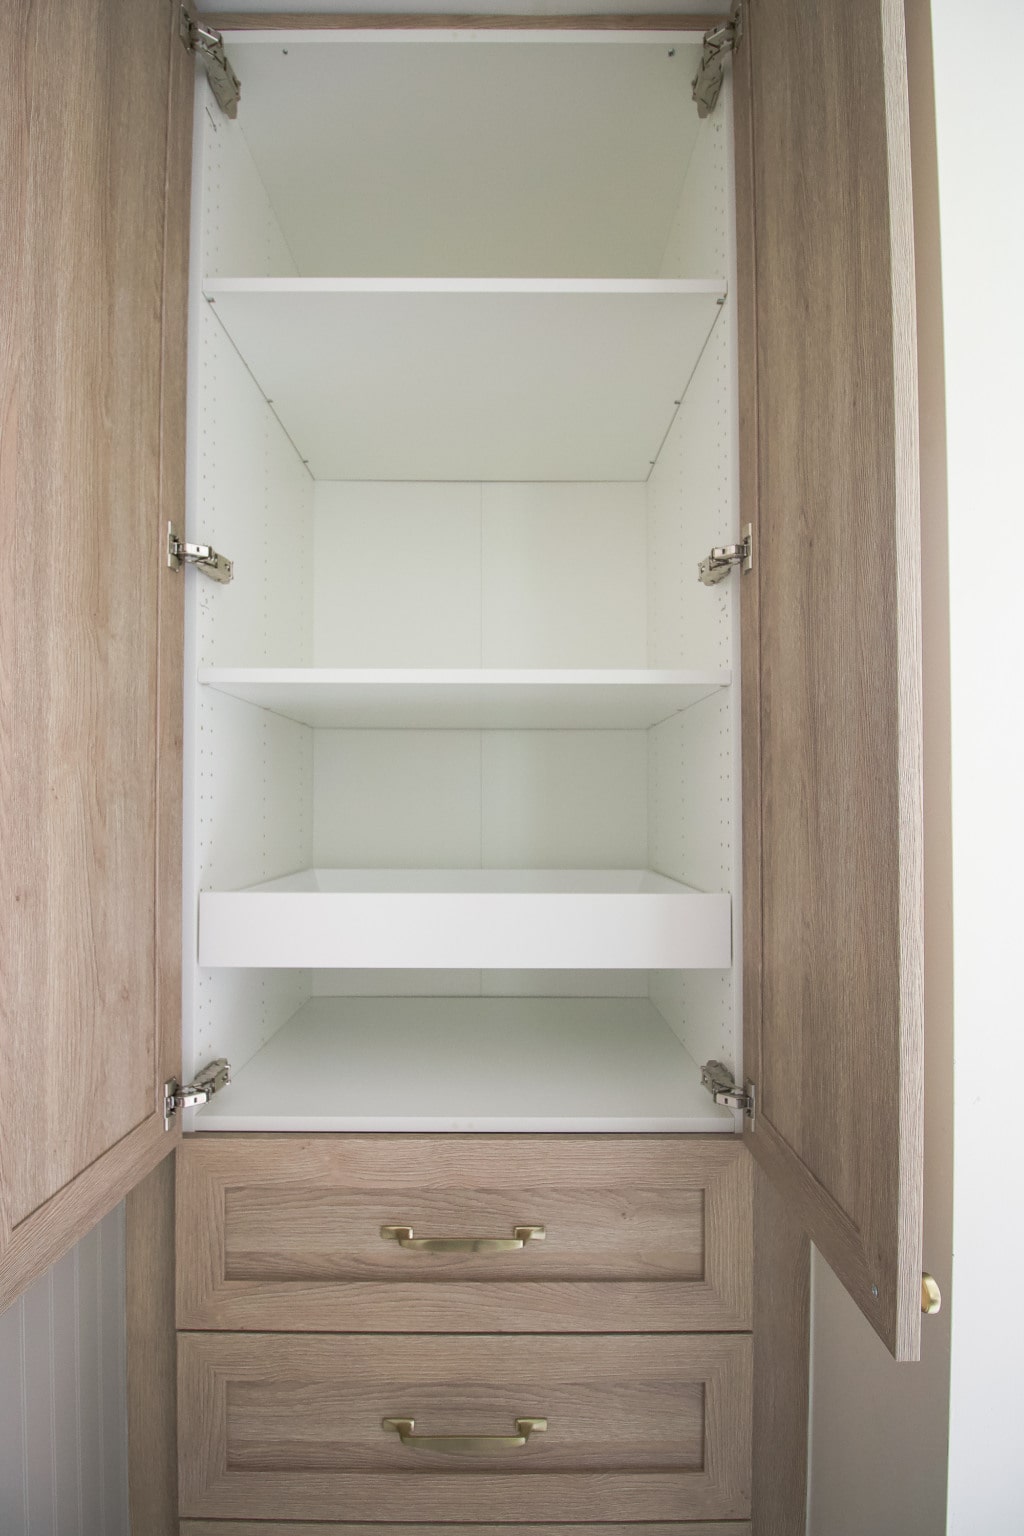 The inside of our IKEA cabinet